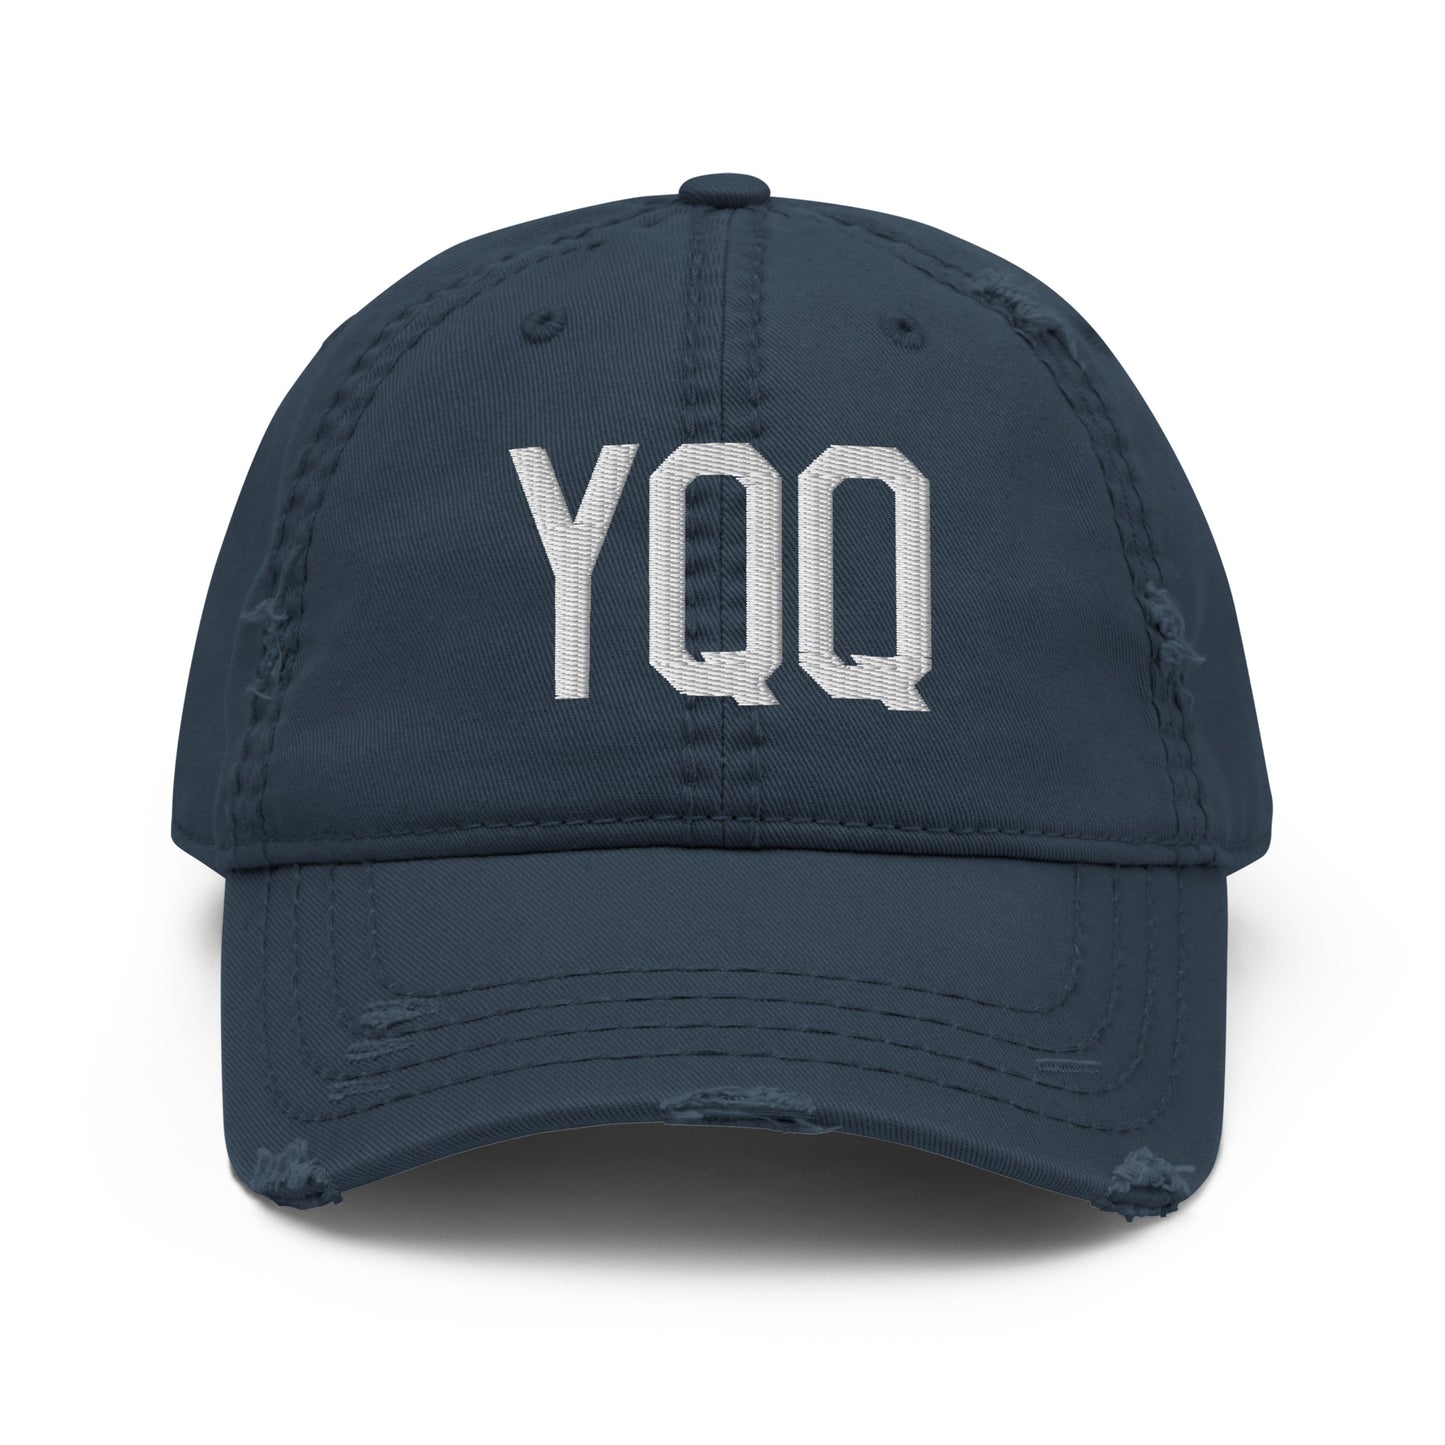 Airport Code Distressed Hat - White • YQQ Comox • YHM Designs - Image 13